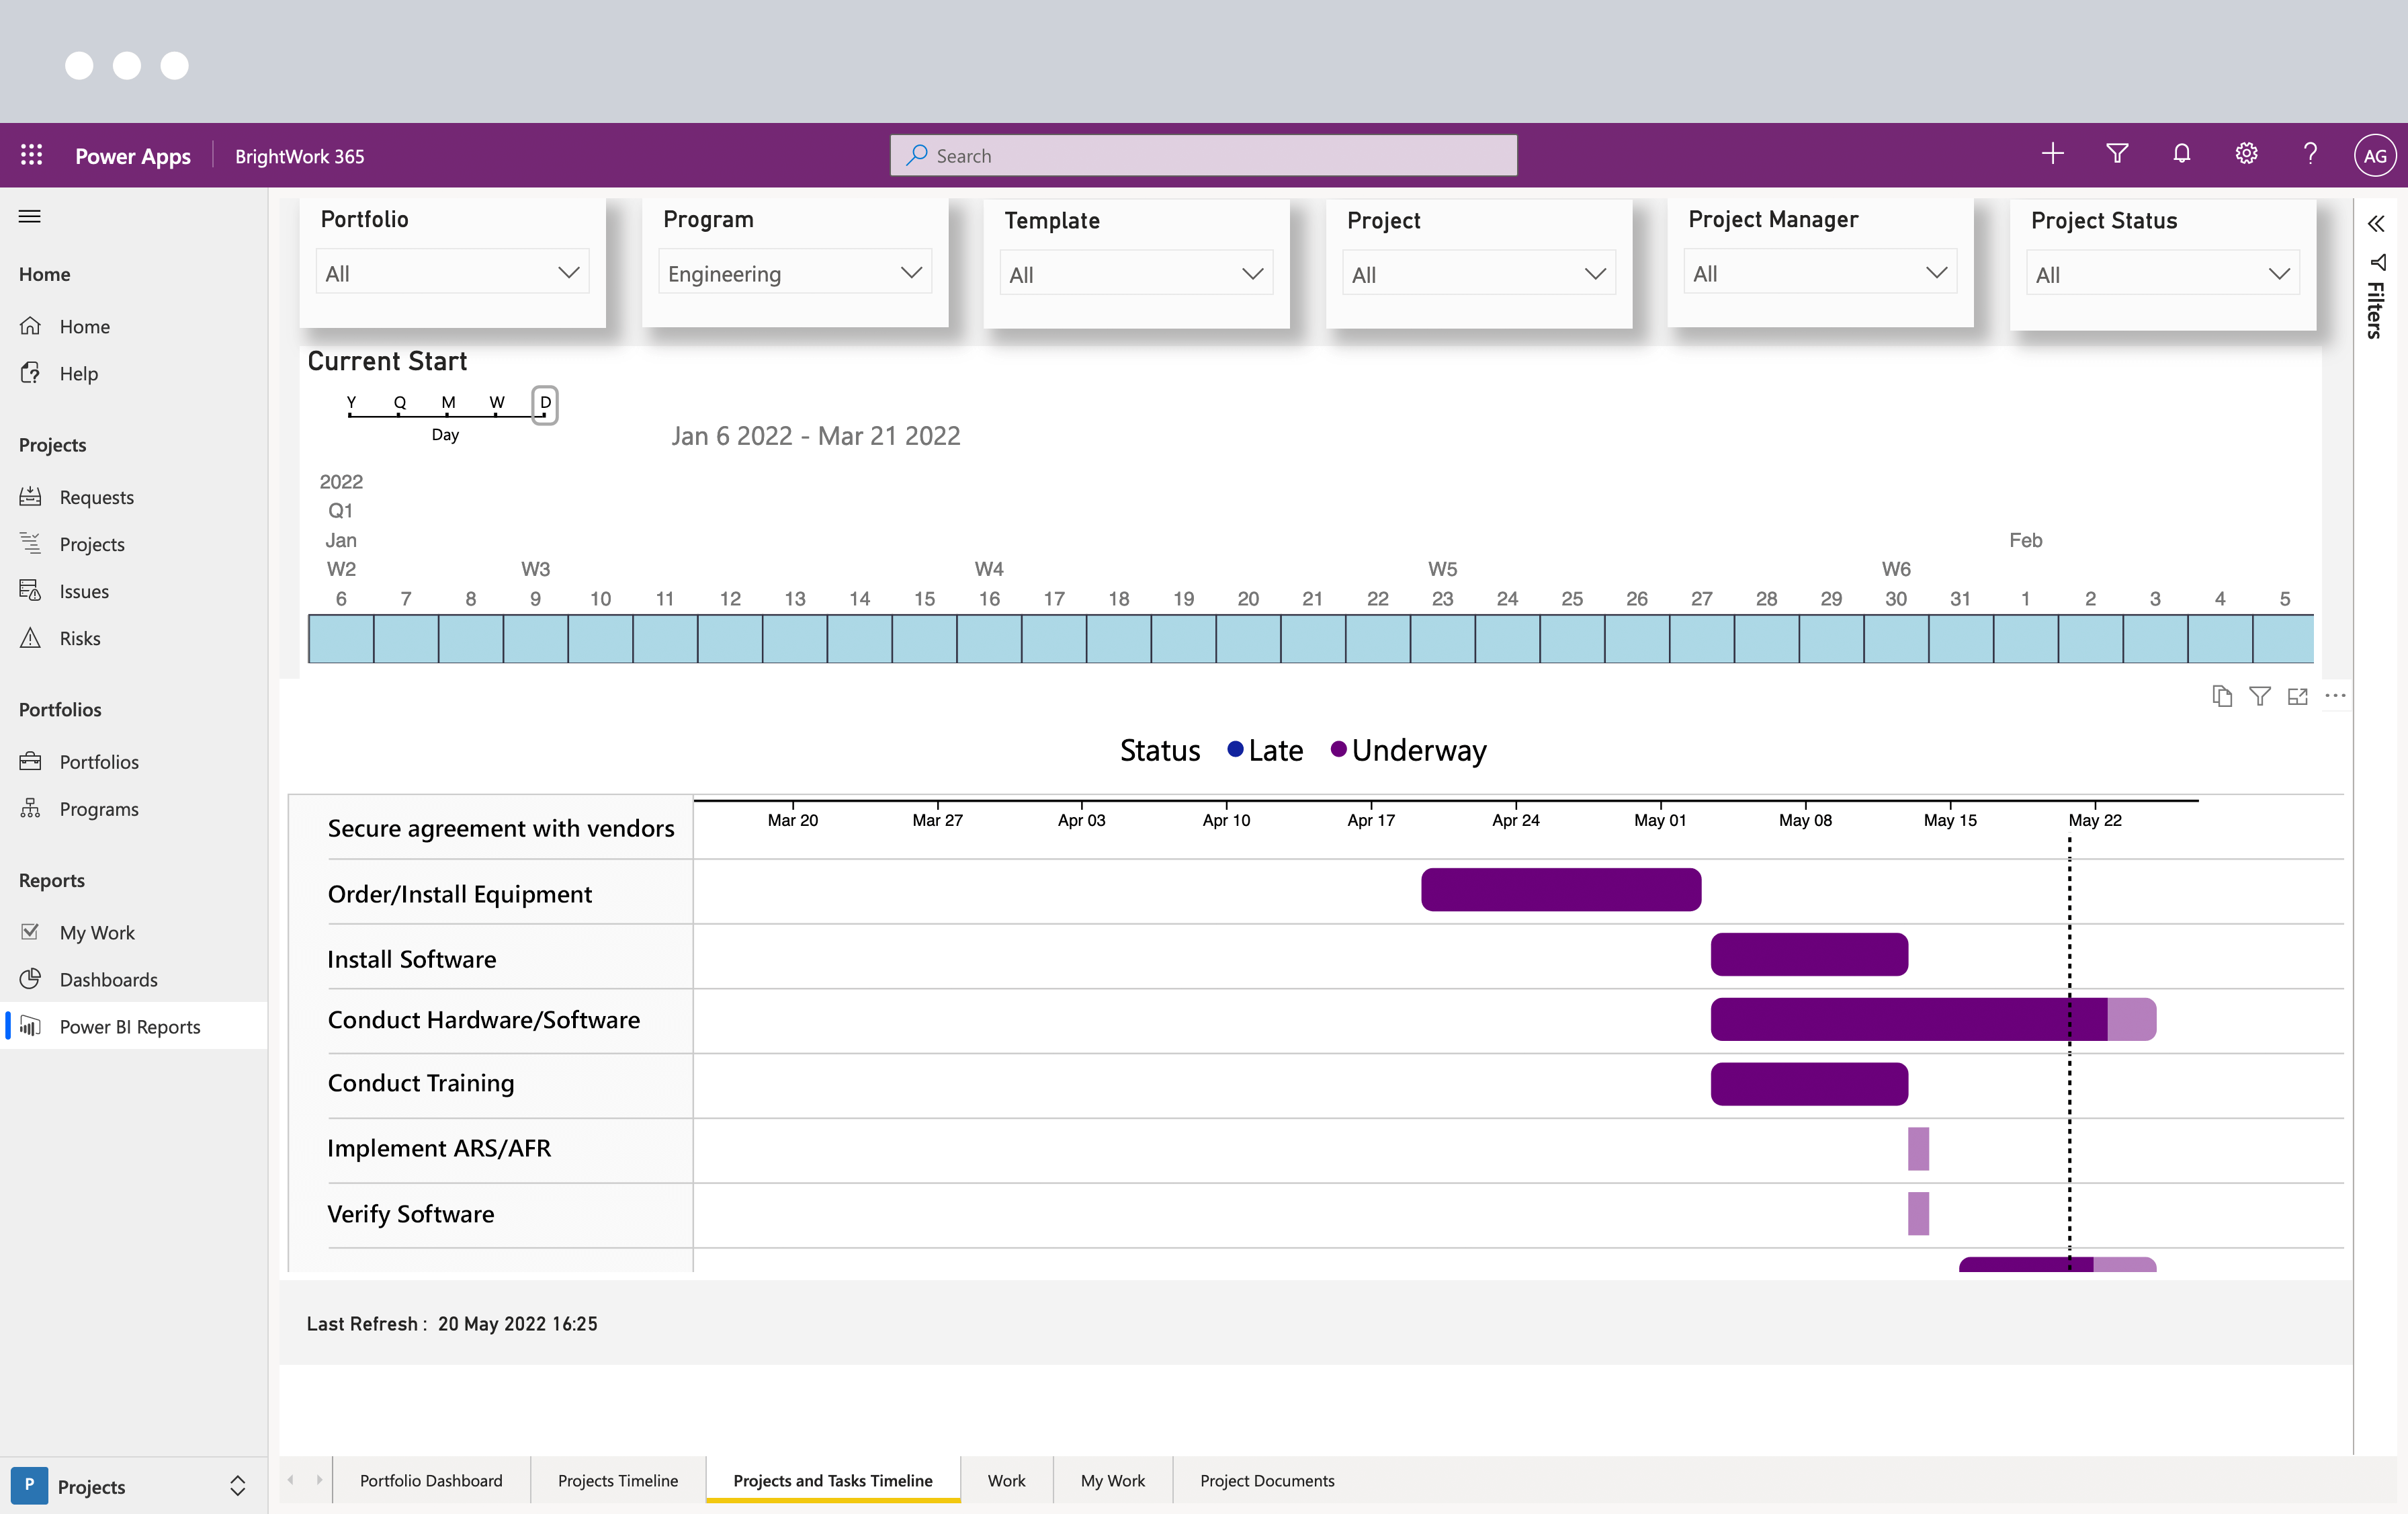 Projects and Tasks Timeline